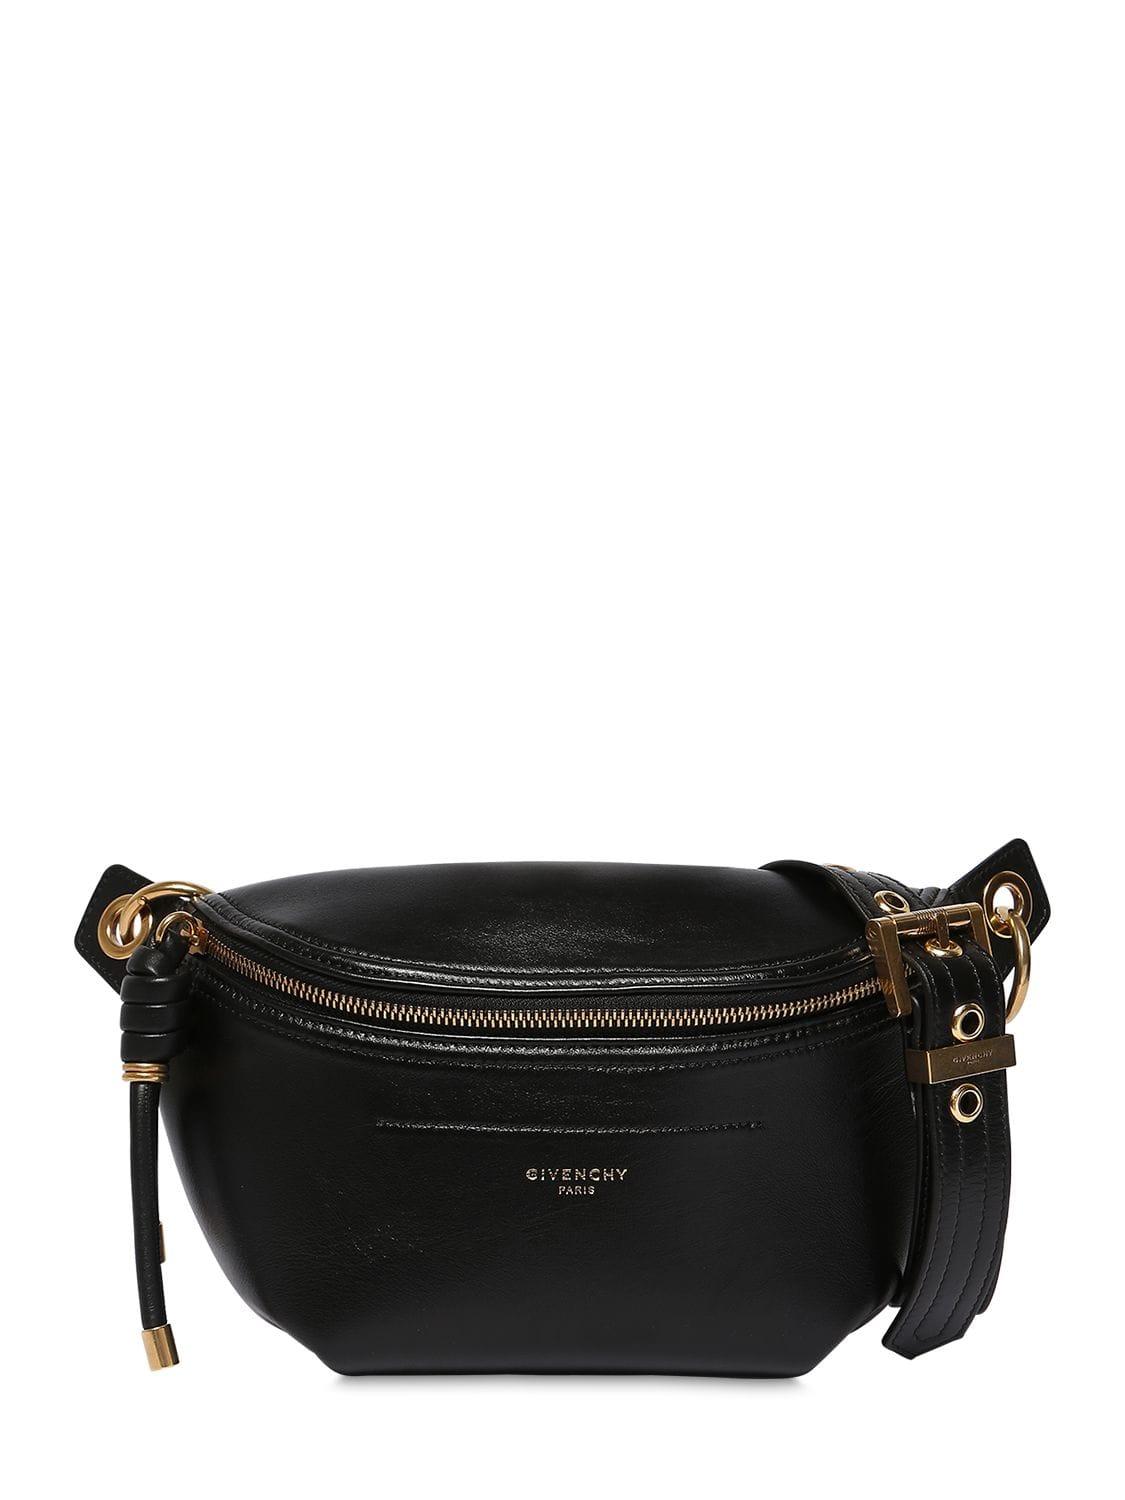 Lyst - Givenchy Whip Leather Belt Bag in Black - Save 11%